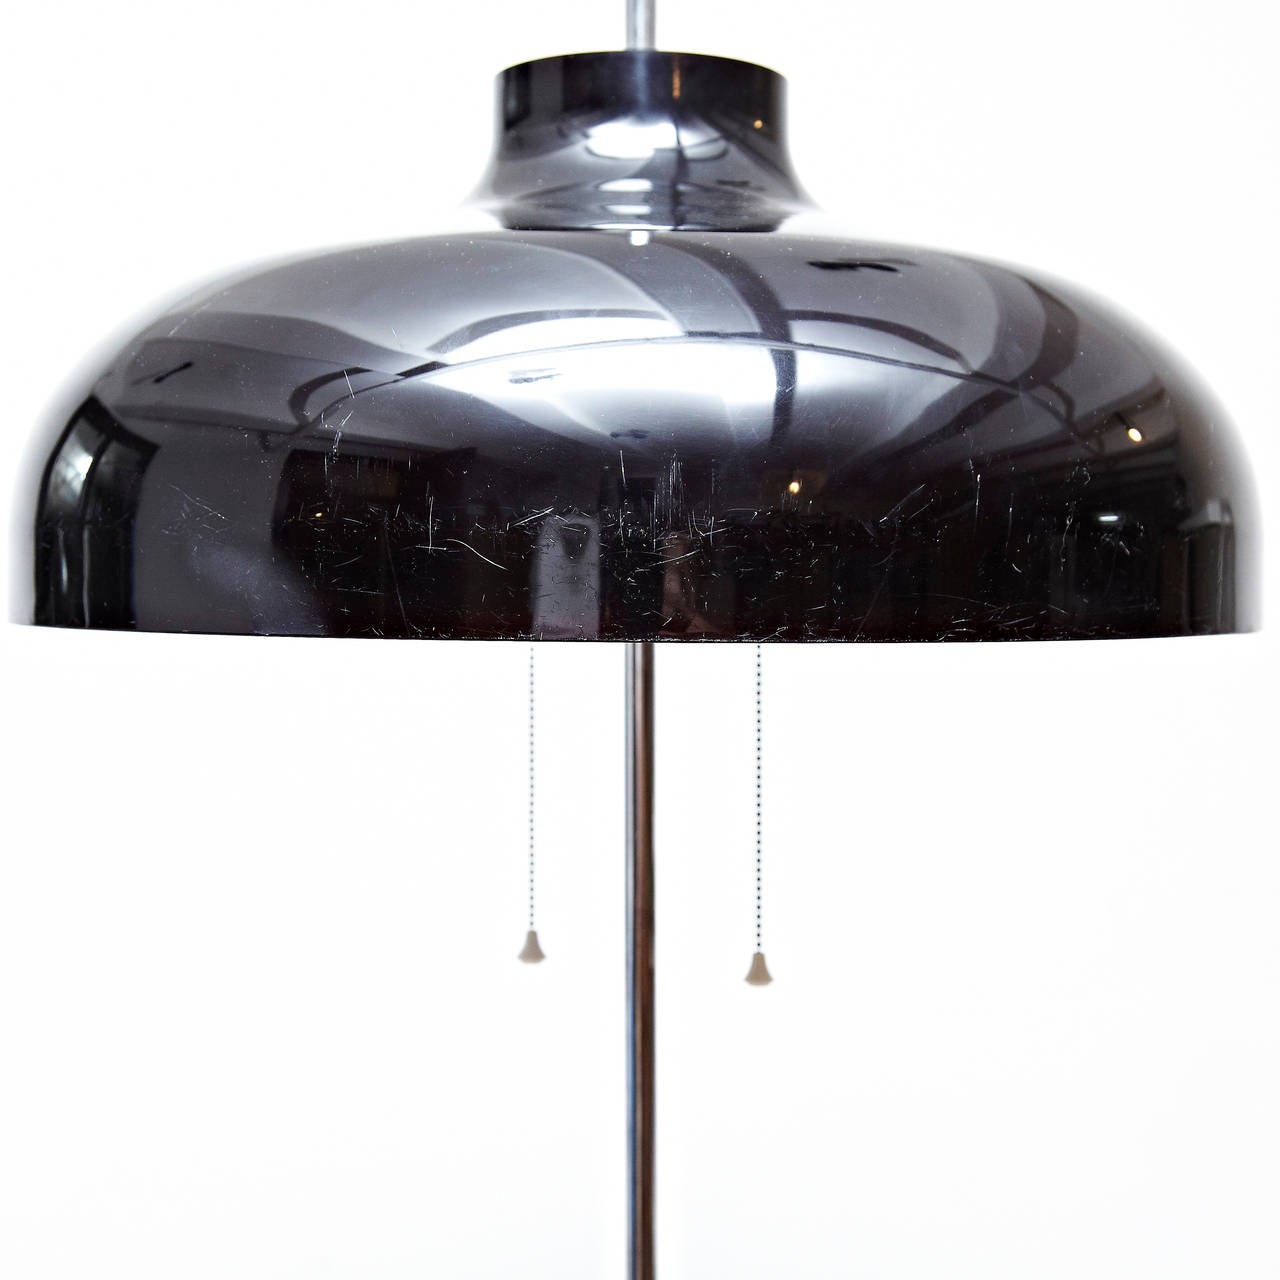 Lamp designed by Miguel Milà, circa 1950.
Manufactured by Tramo (Spain).

In good original condition, with minor wear consistent with age and use, preserving a beautiful patina.

Miguel Milà represents like no other person Spanish contemporary